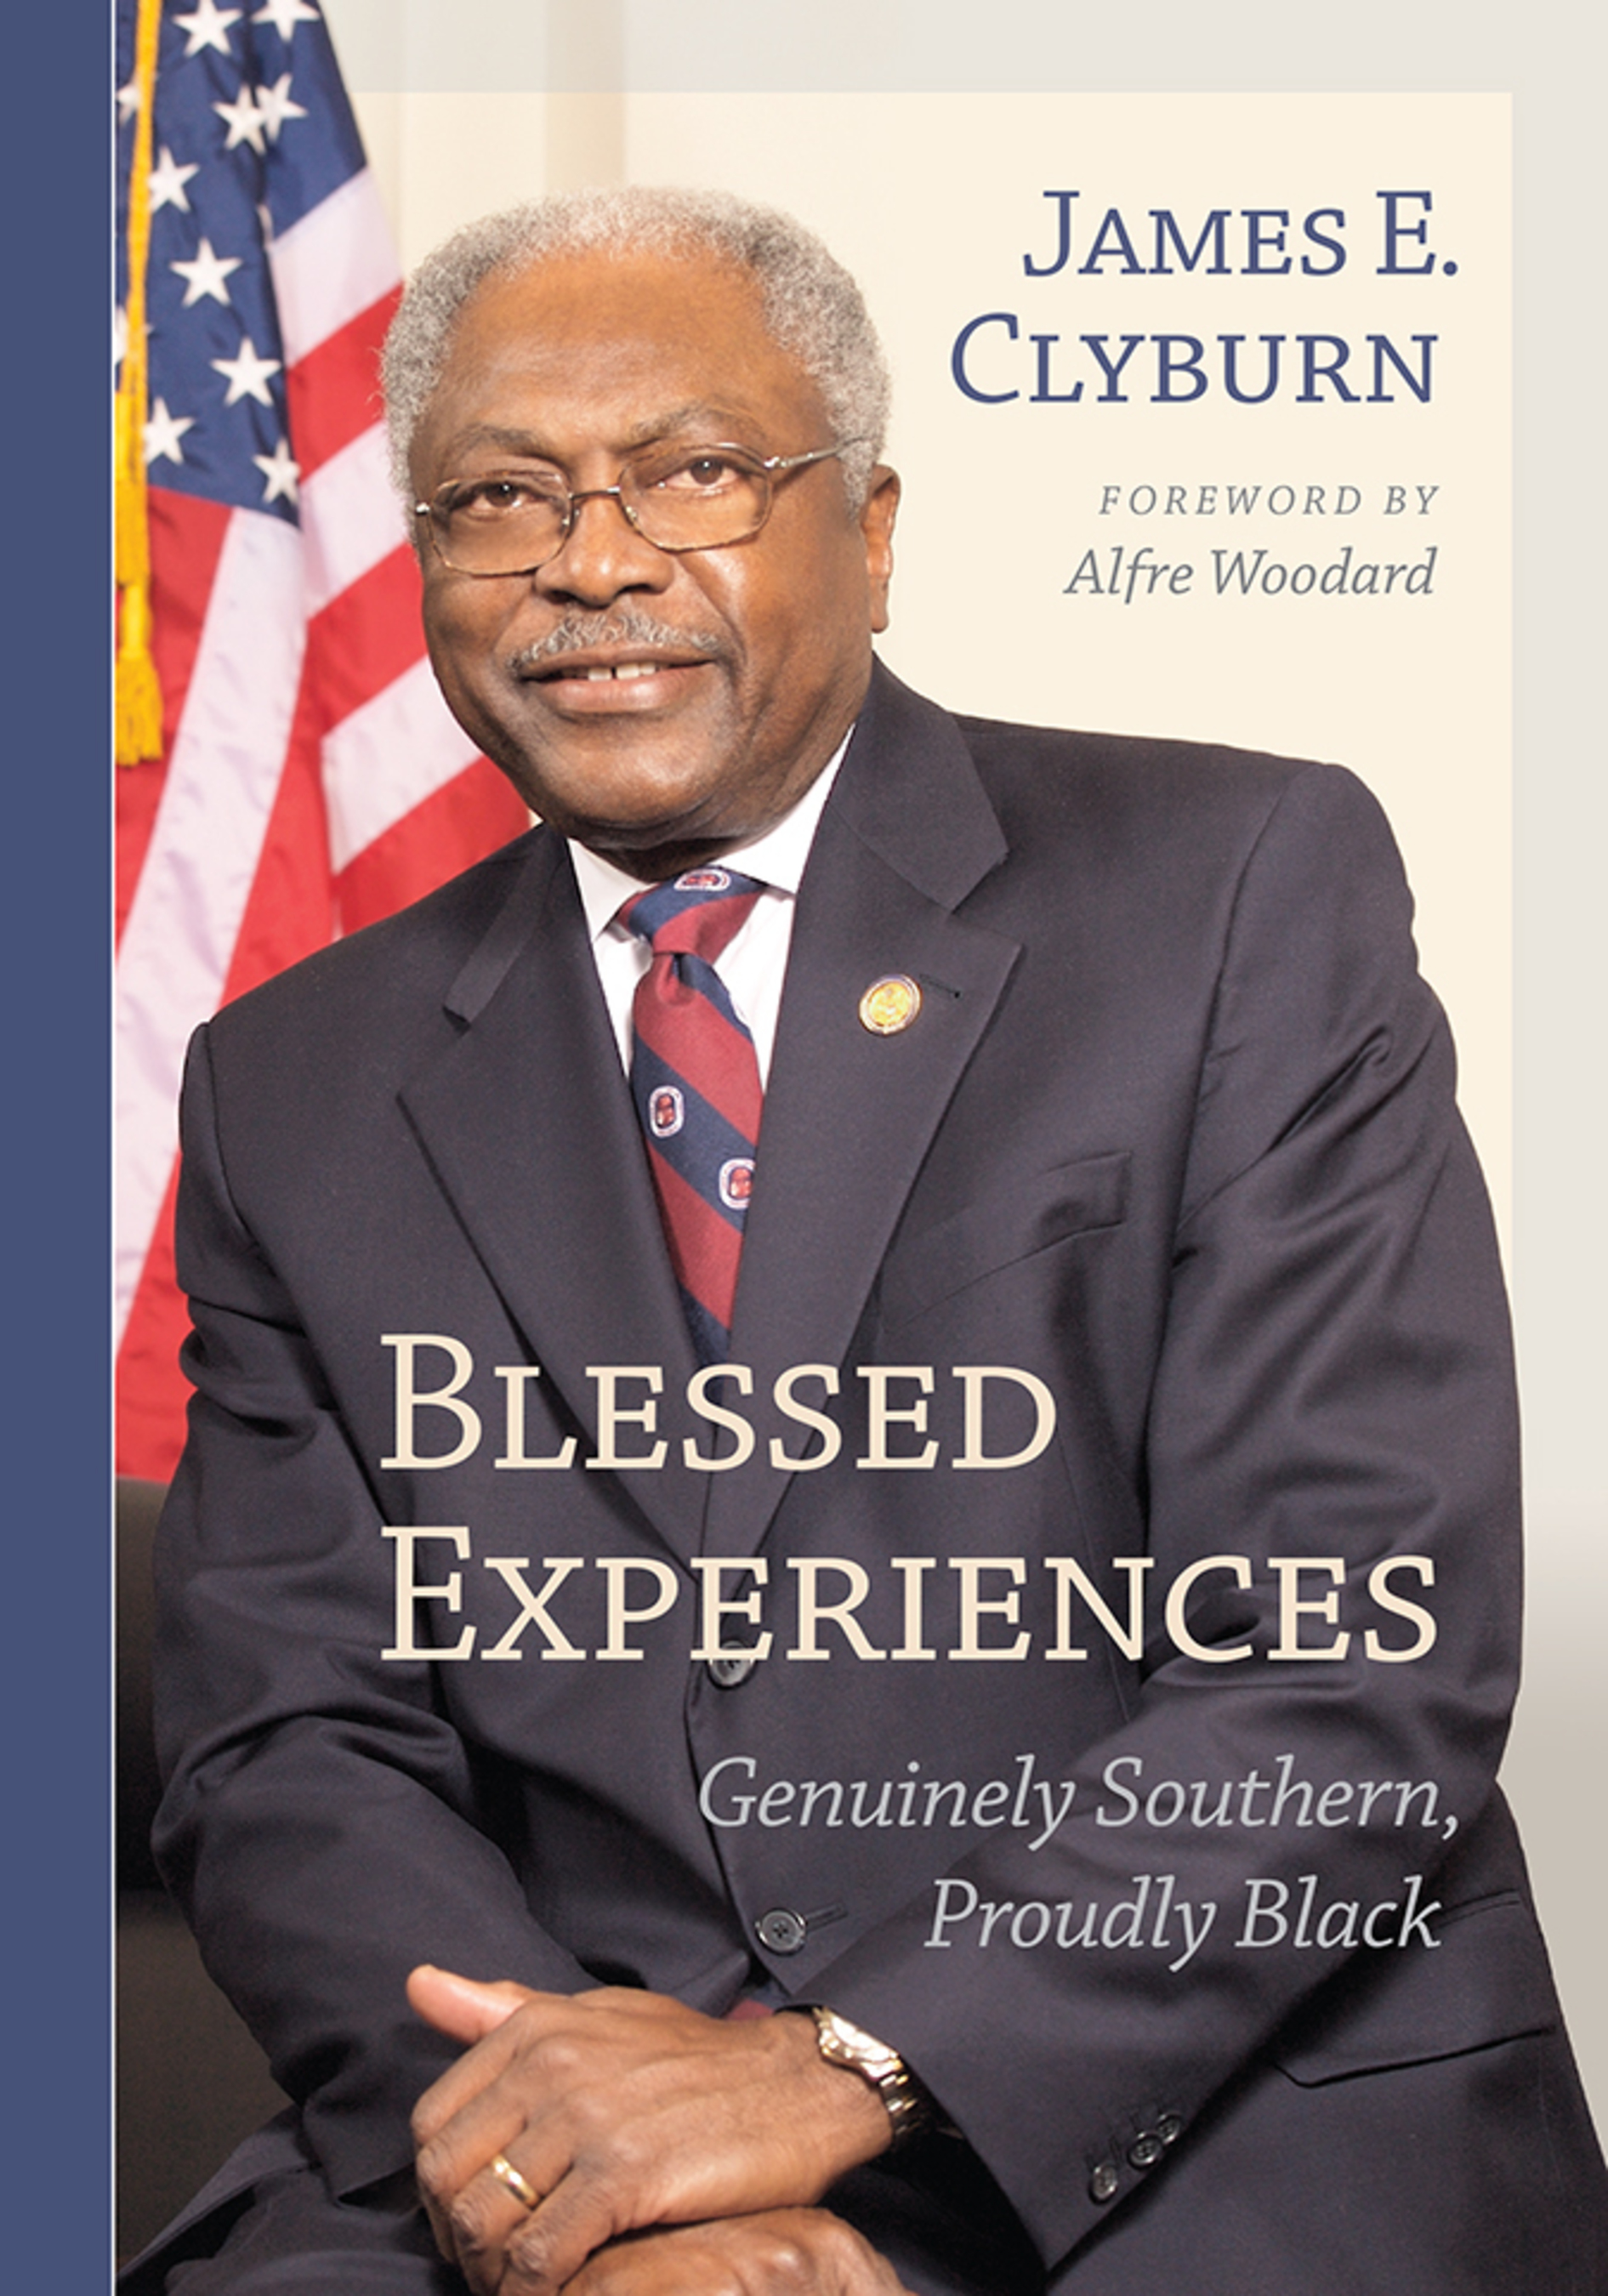 James E. Clyburn's Memoir, "Blessed Experiences: Genuinely Southern, Proudly Black" Published May 1, 2014. (PRNewsFoto/University of South Carolina...)